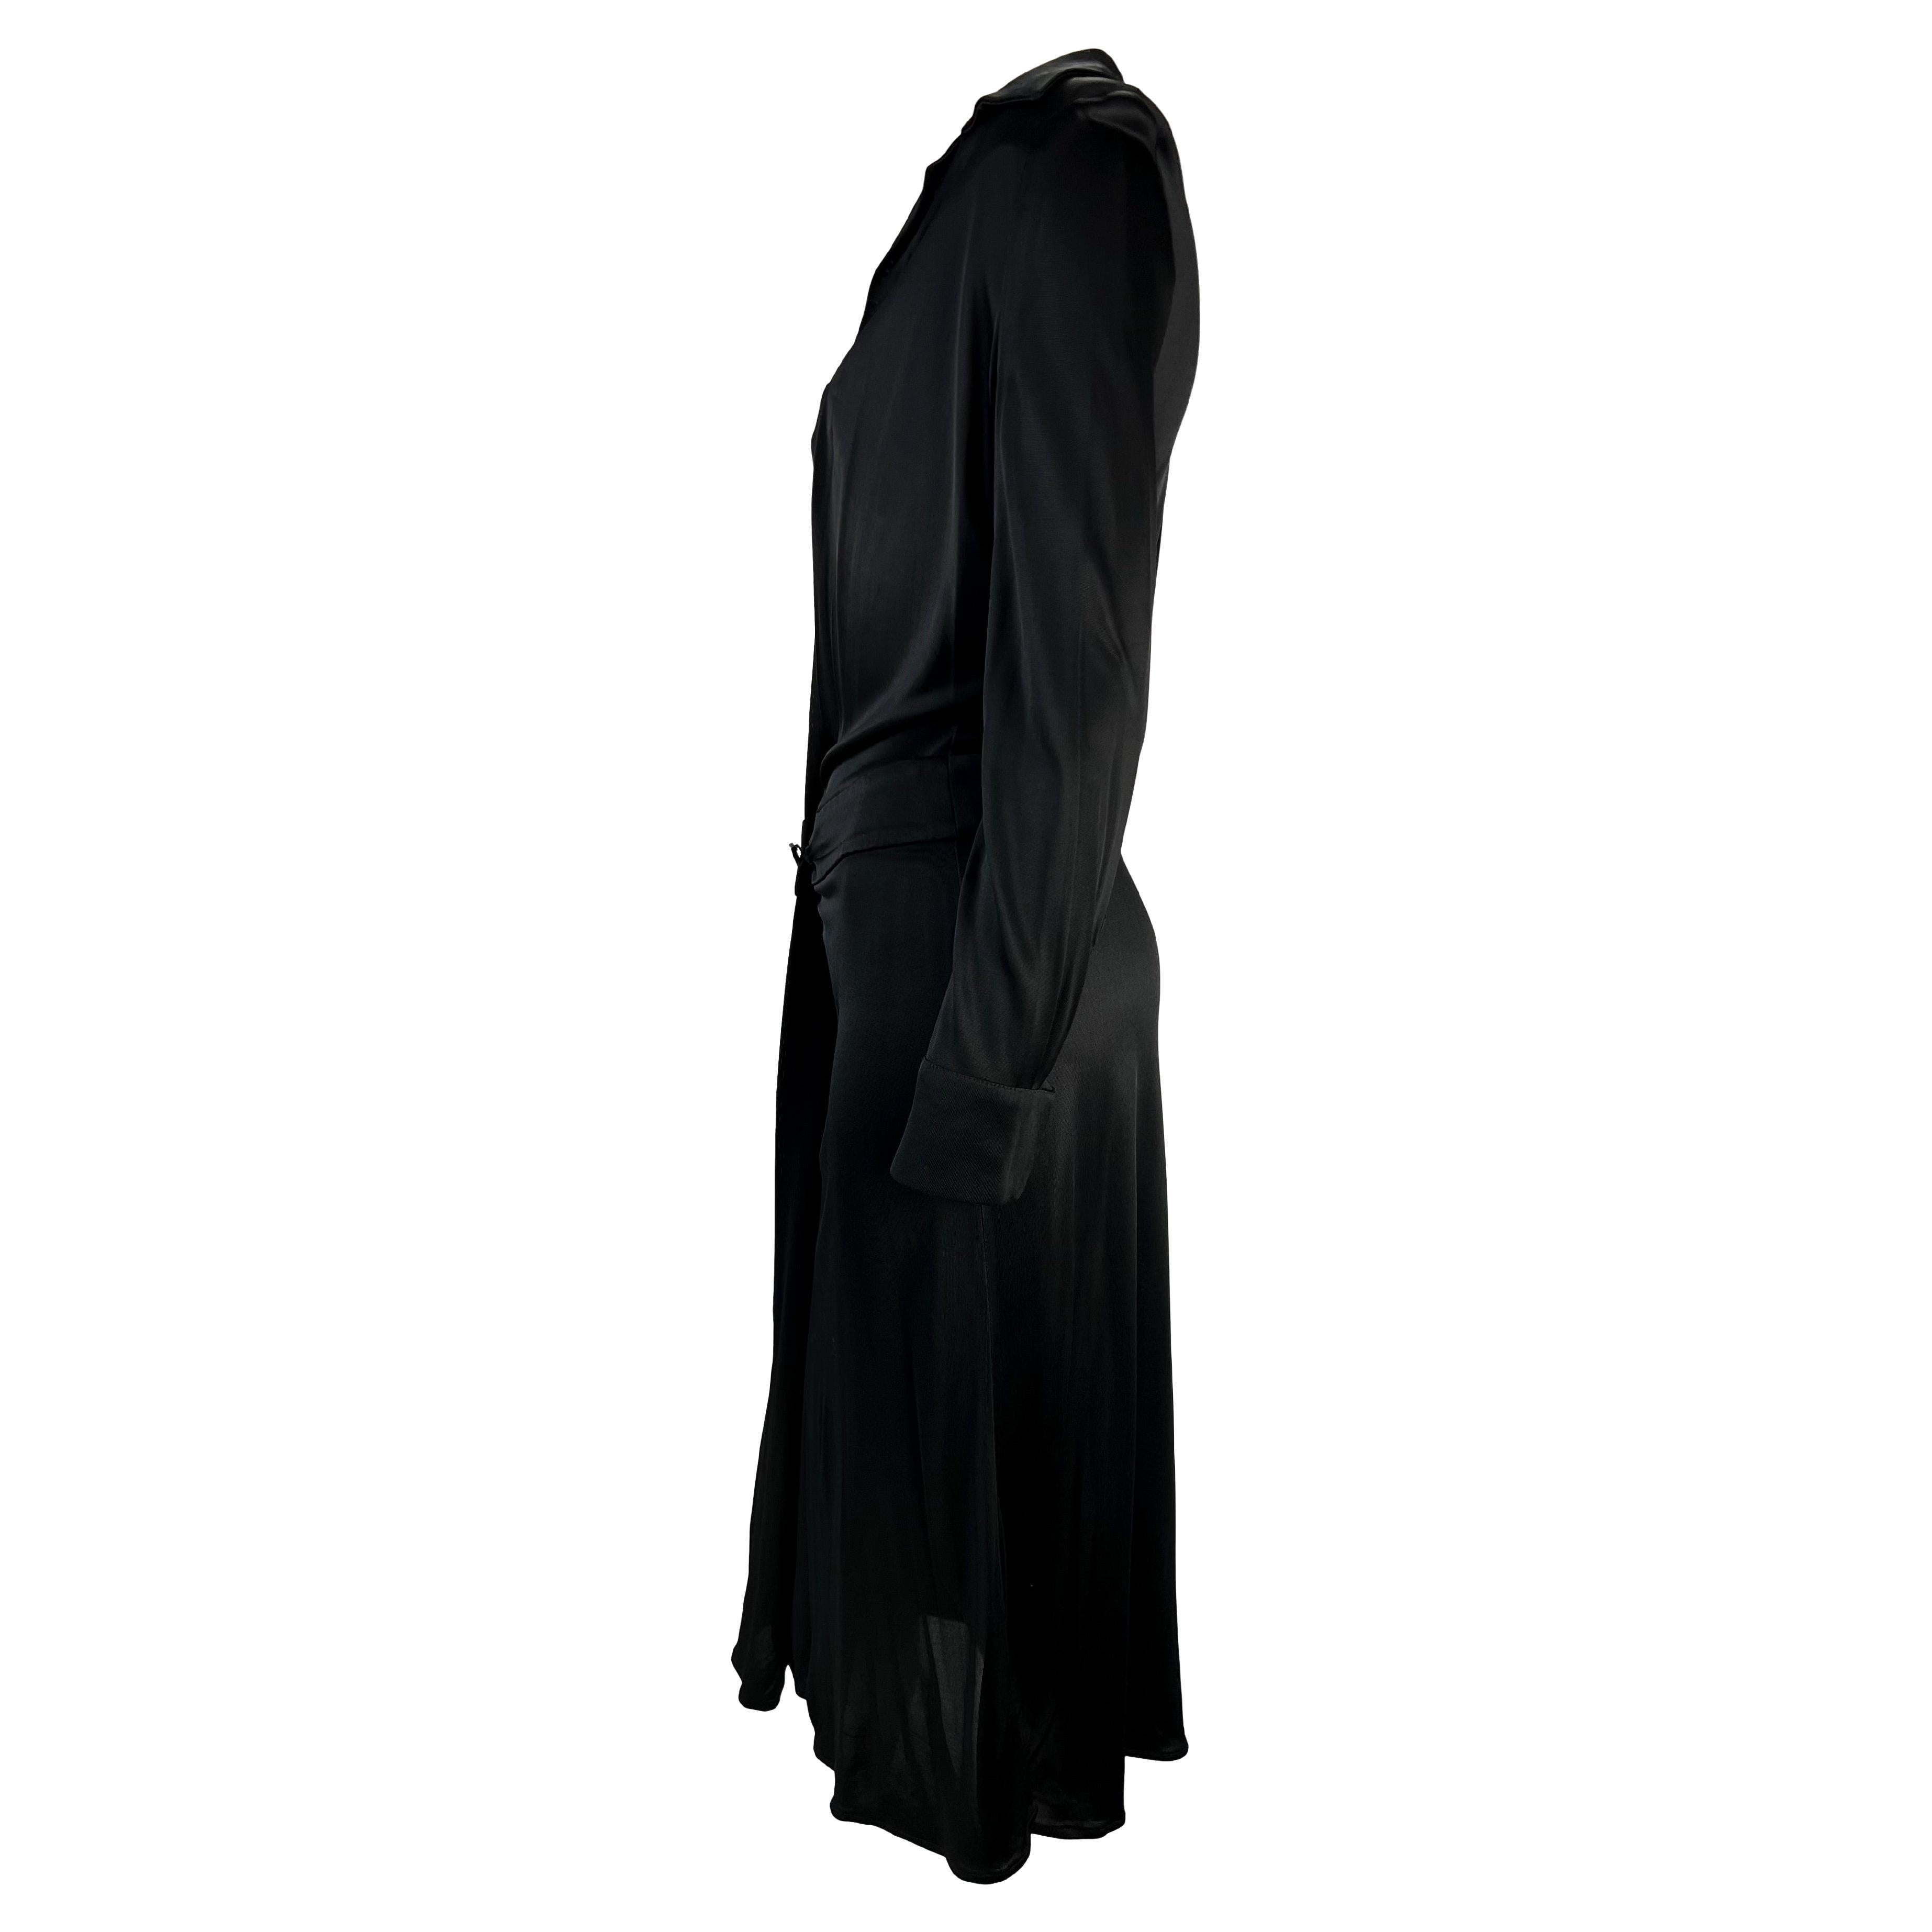 S/S 2000 Gucci by Tom Ford Runway Plunging Neckline Black Viscose Runway Dress 2